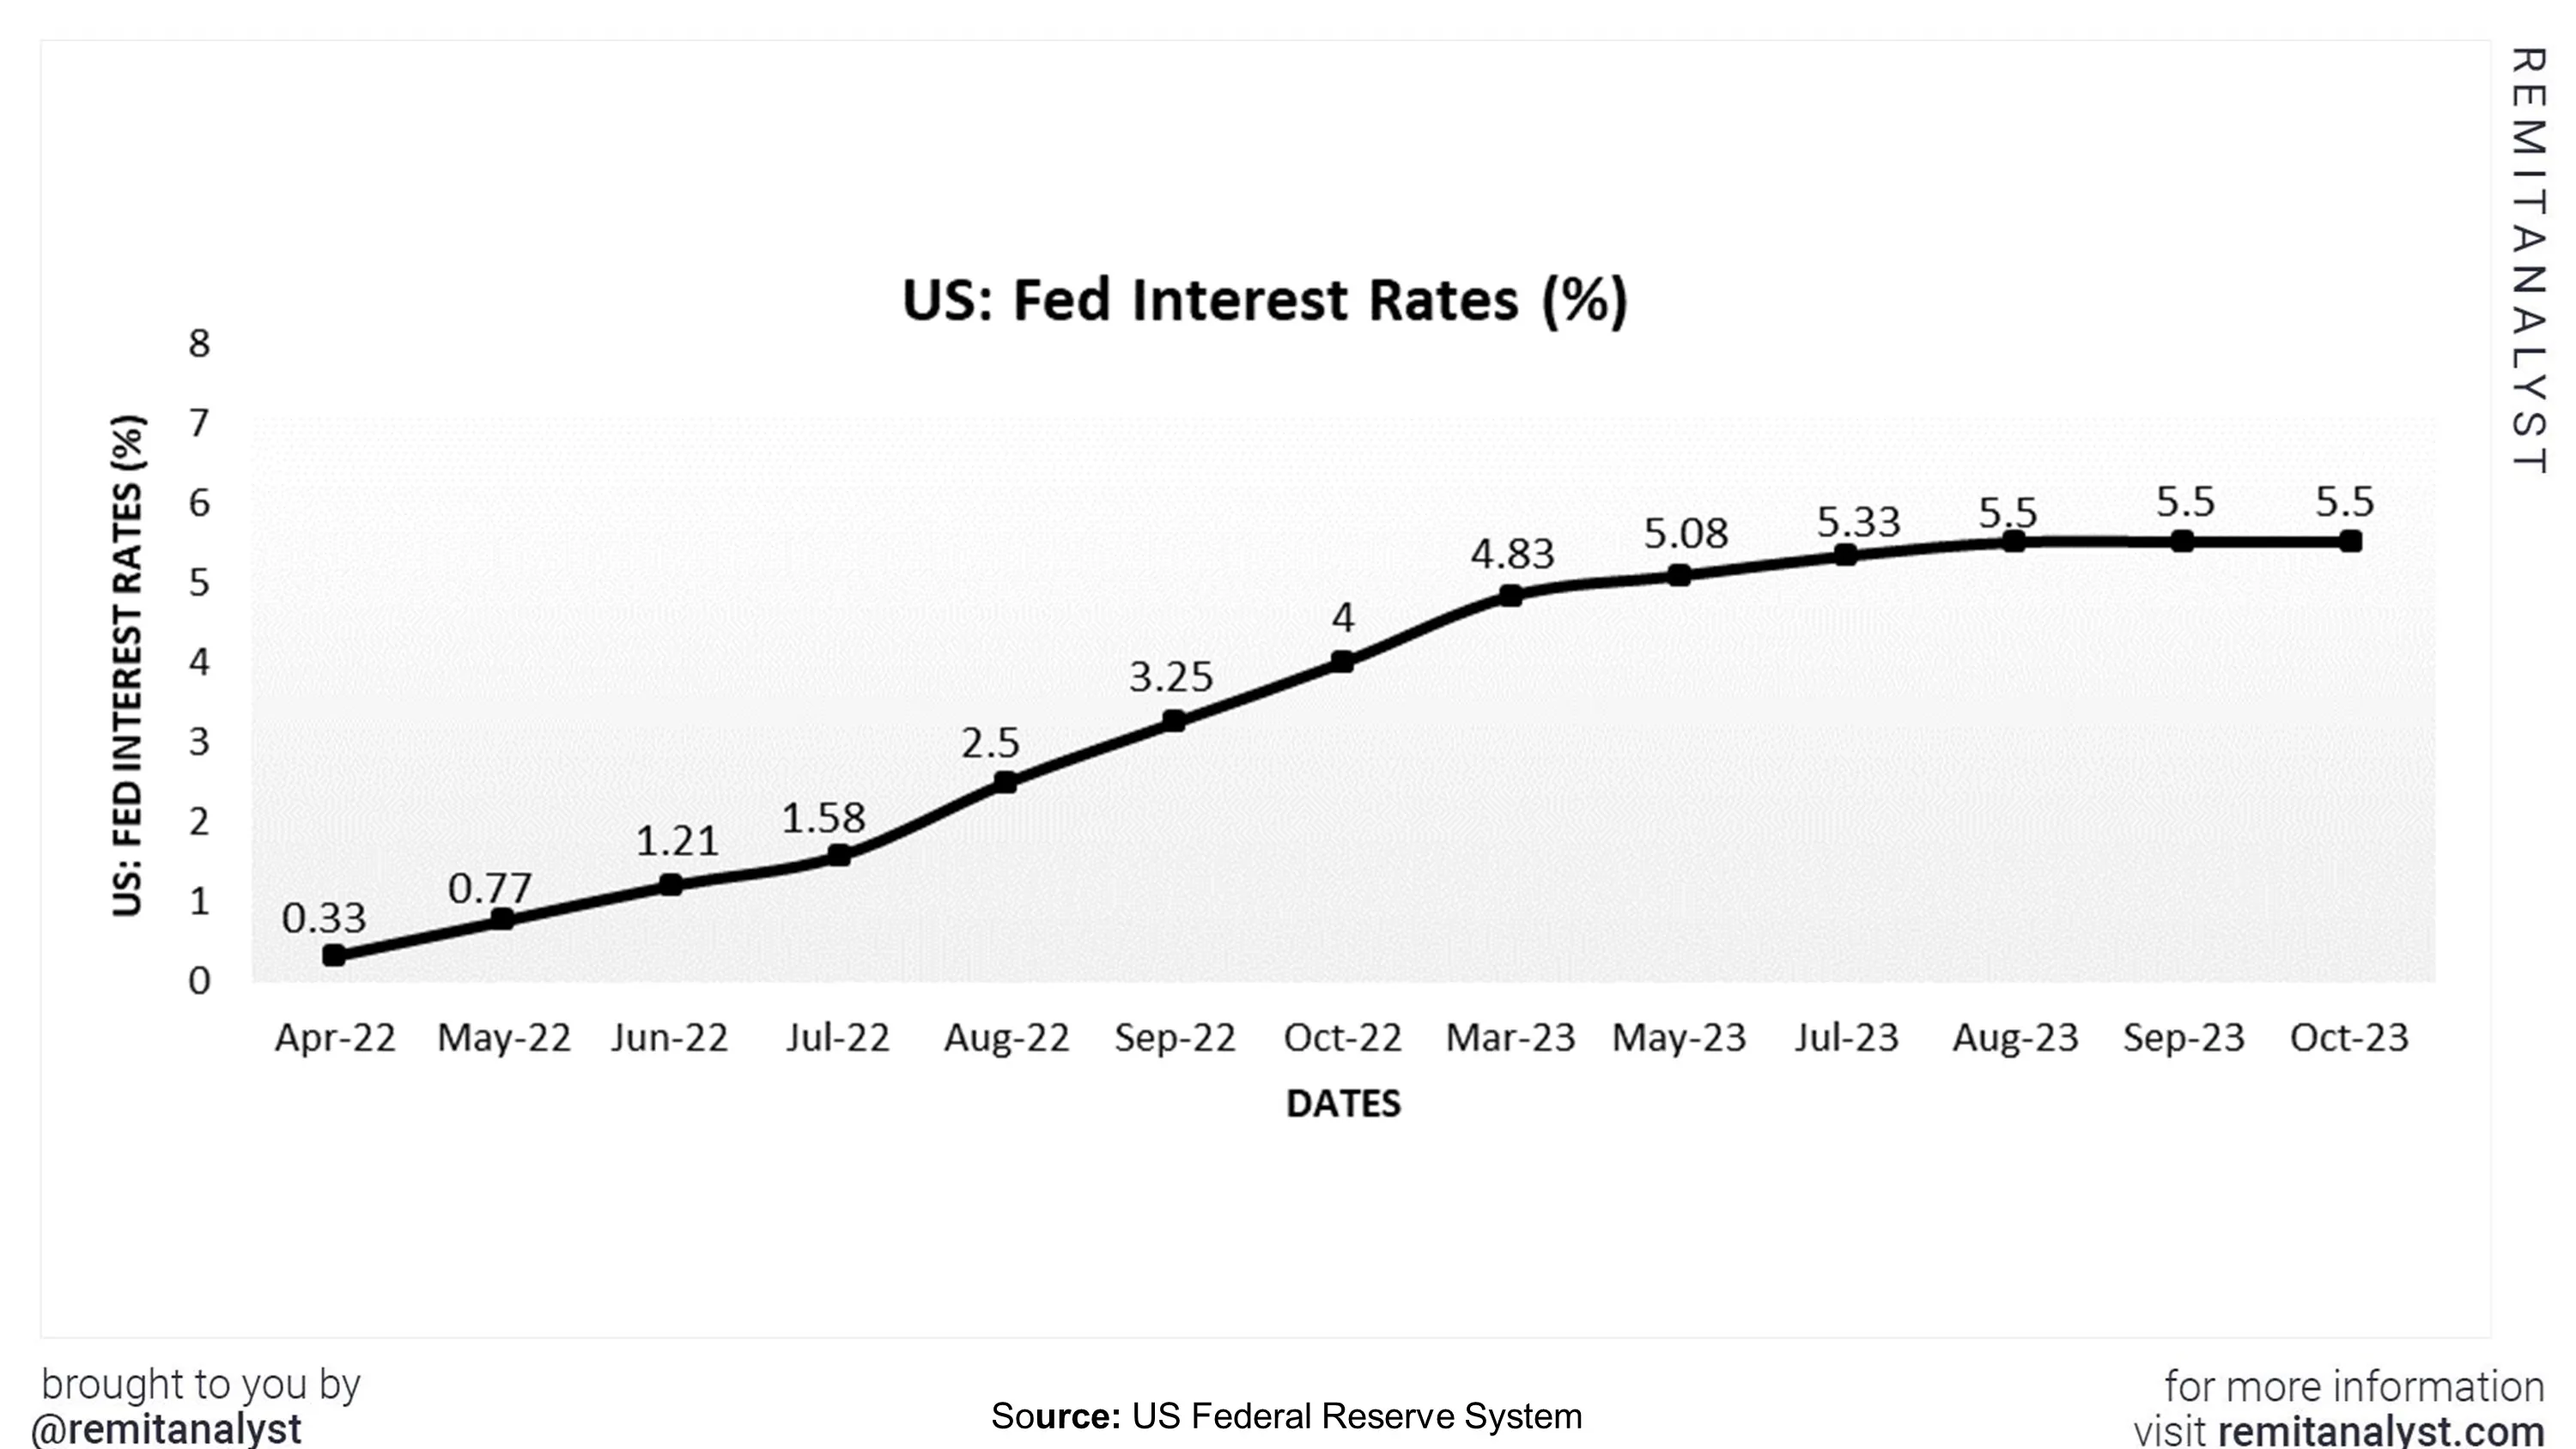 interest-rates-in-us-from-apr-2022-to-oct-2023